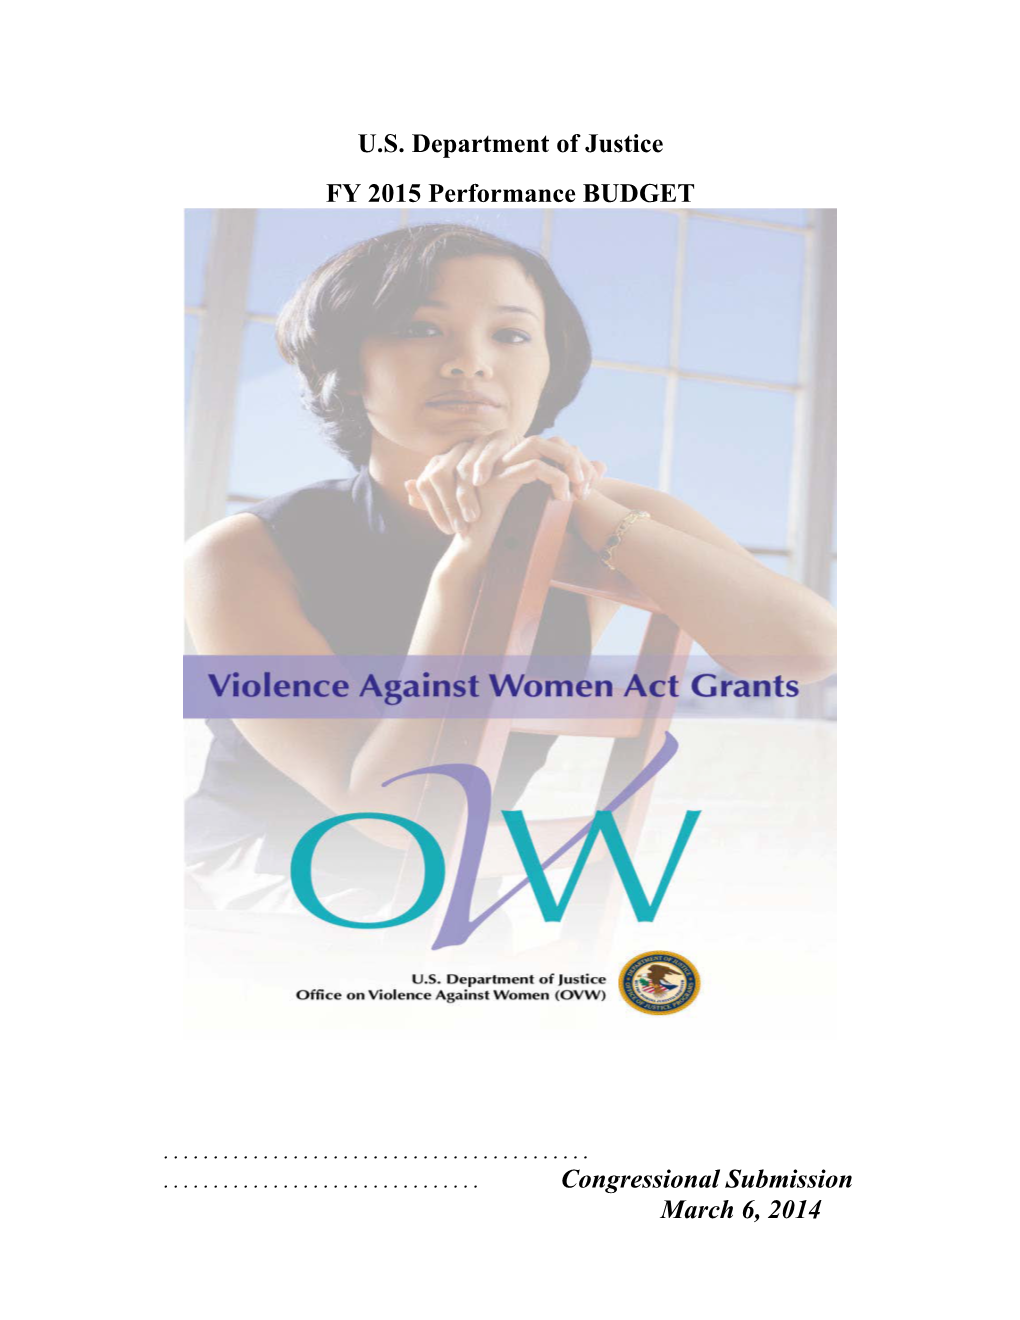 Office on Violence Against Women (OVW) Totals $422,500,000, Including 70 Positions and 63 FTE